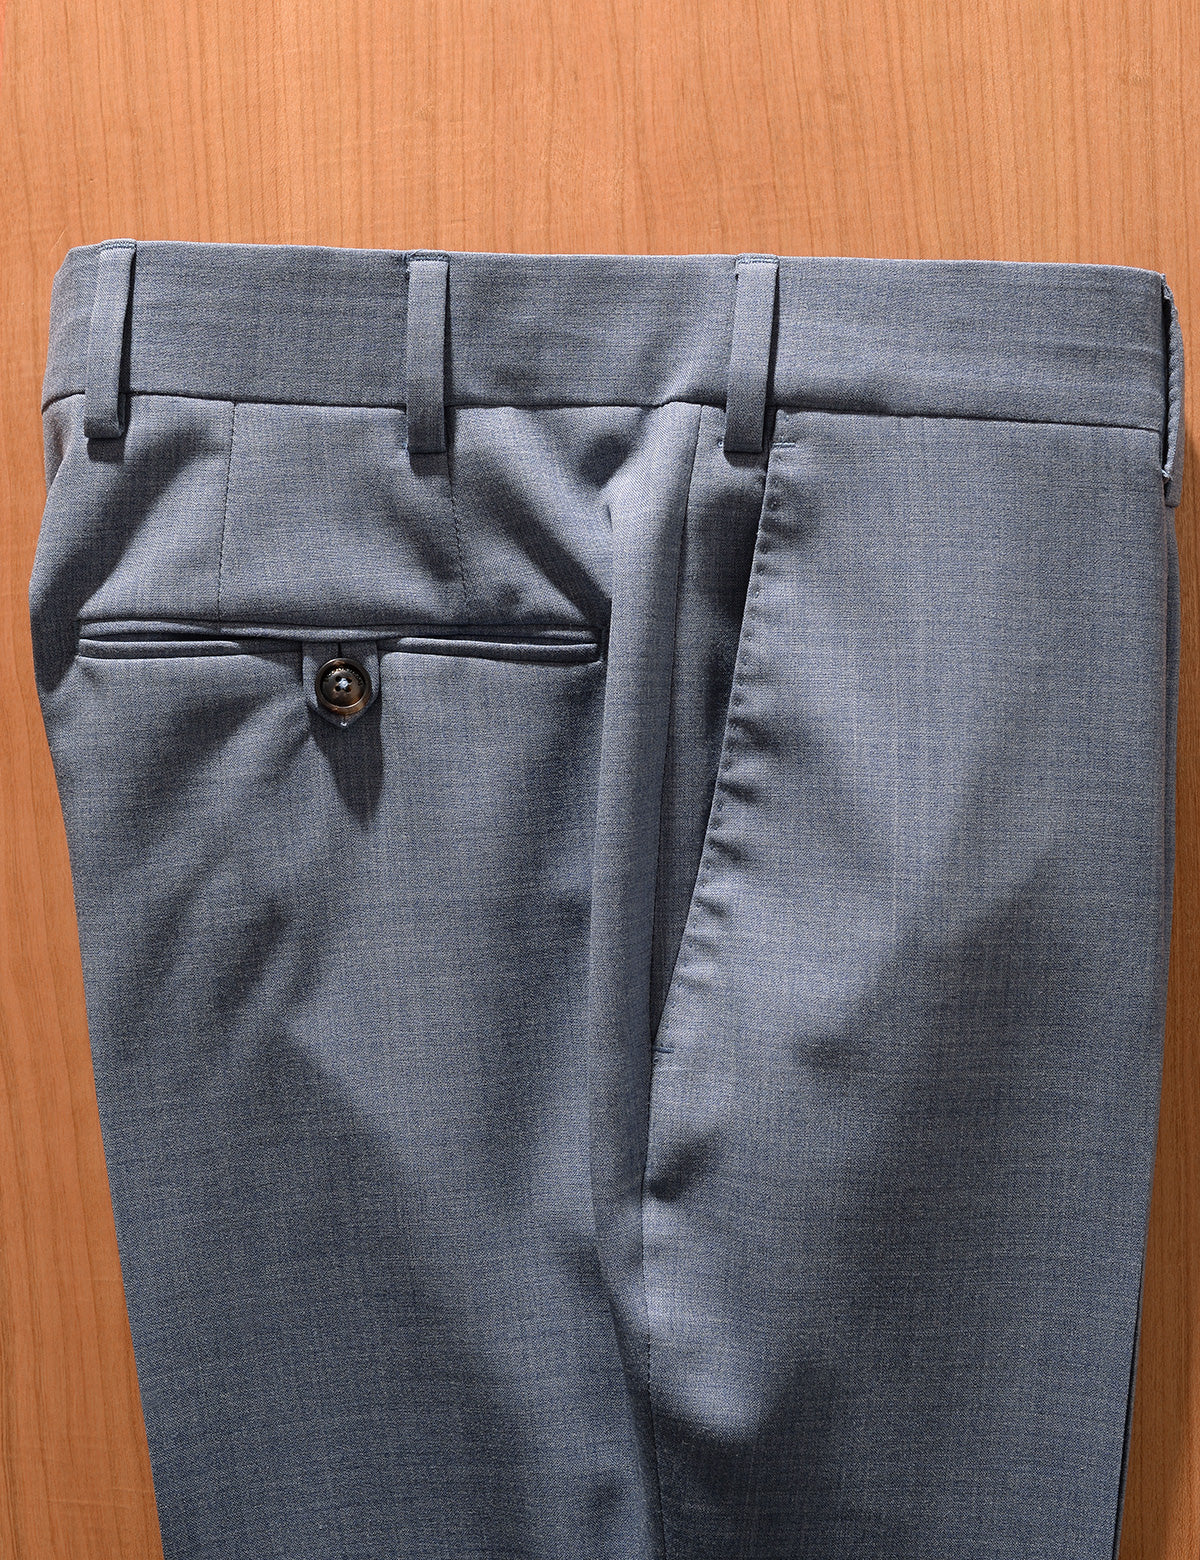 Detail shot of Brooklyn Tailors BKT50 Tailored Trousers in Heathered Plainweave - Summer Sky showing side view of side pocket, back pocket, and waist